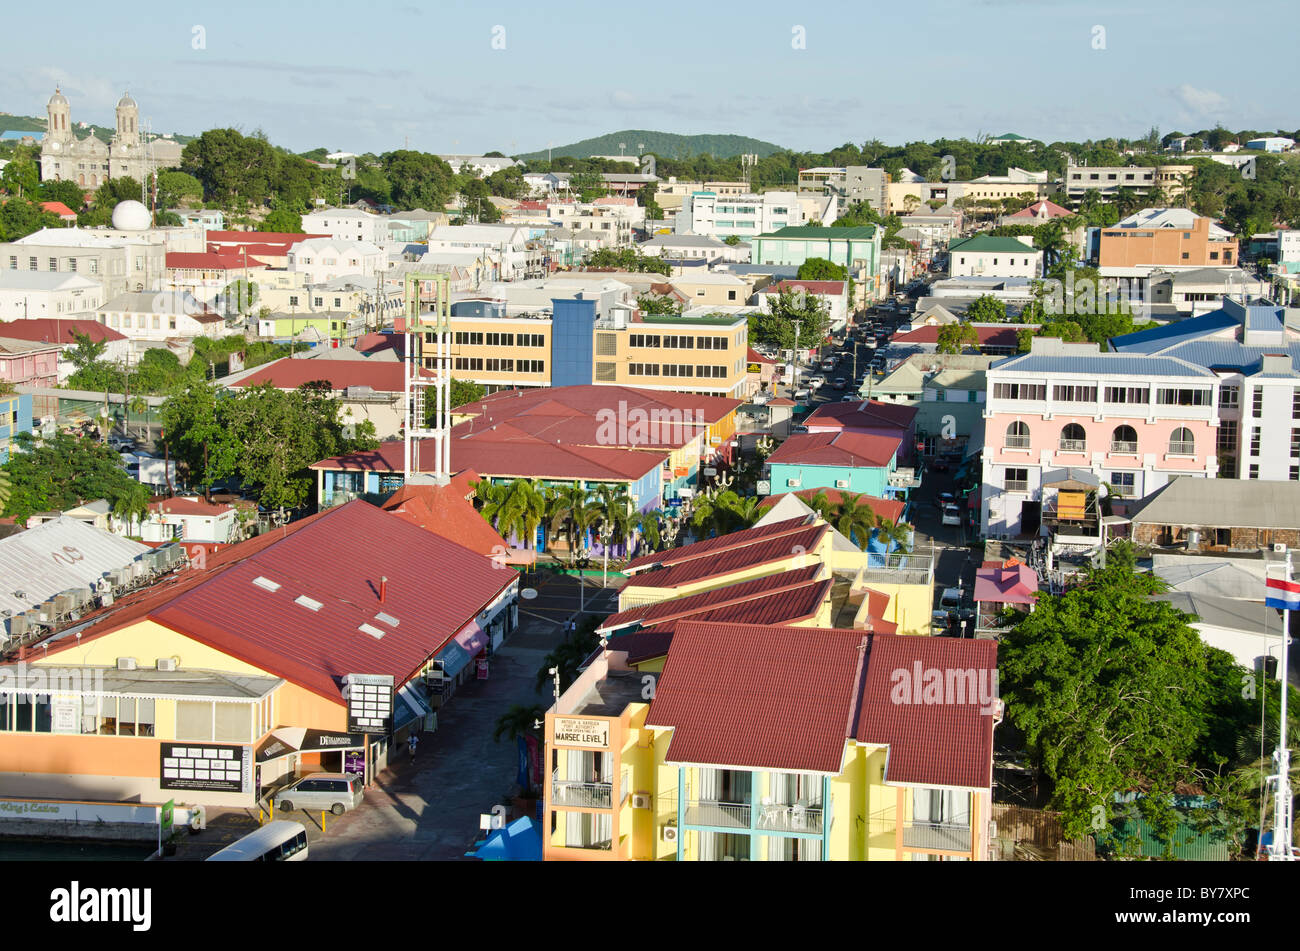 Looking down on Heritage Quay shopping area St Johns, Antigua Stock Photo